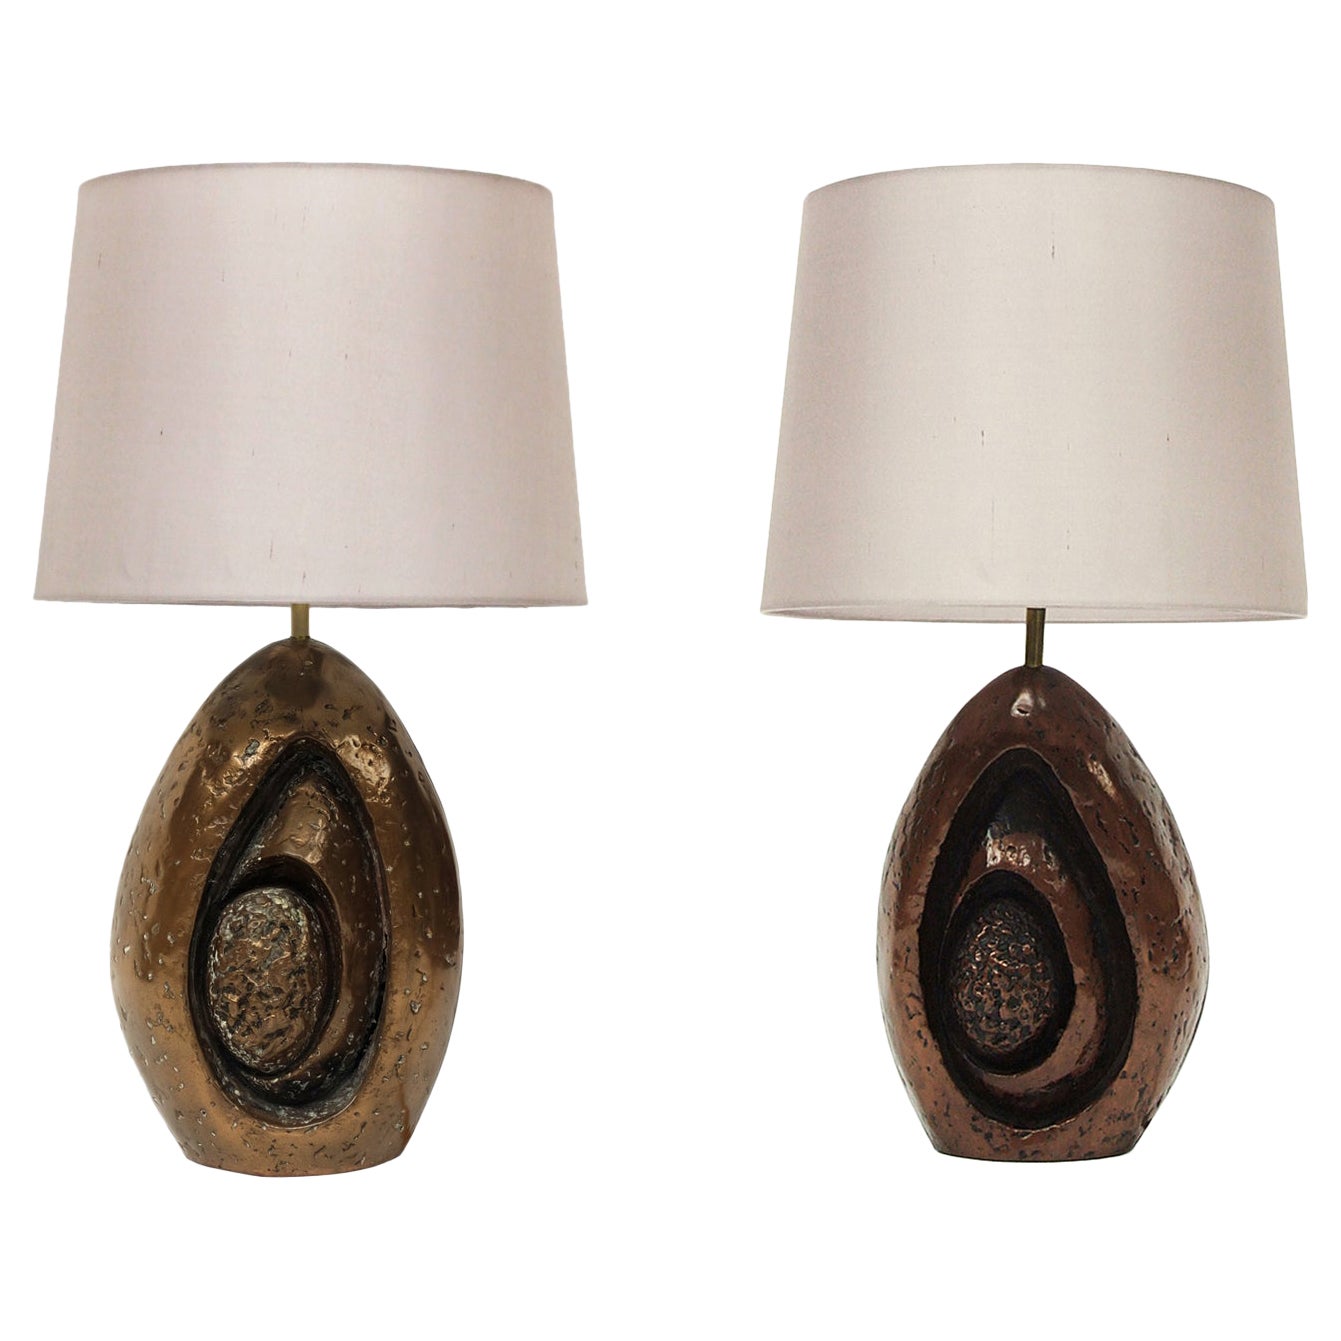 1960s Pair of Sculptural Bronzed Resin Phandeve Table Lamps